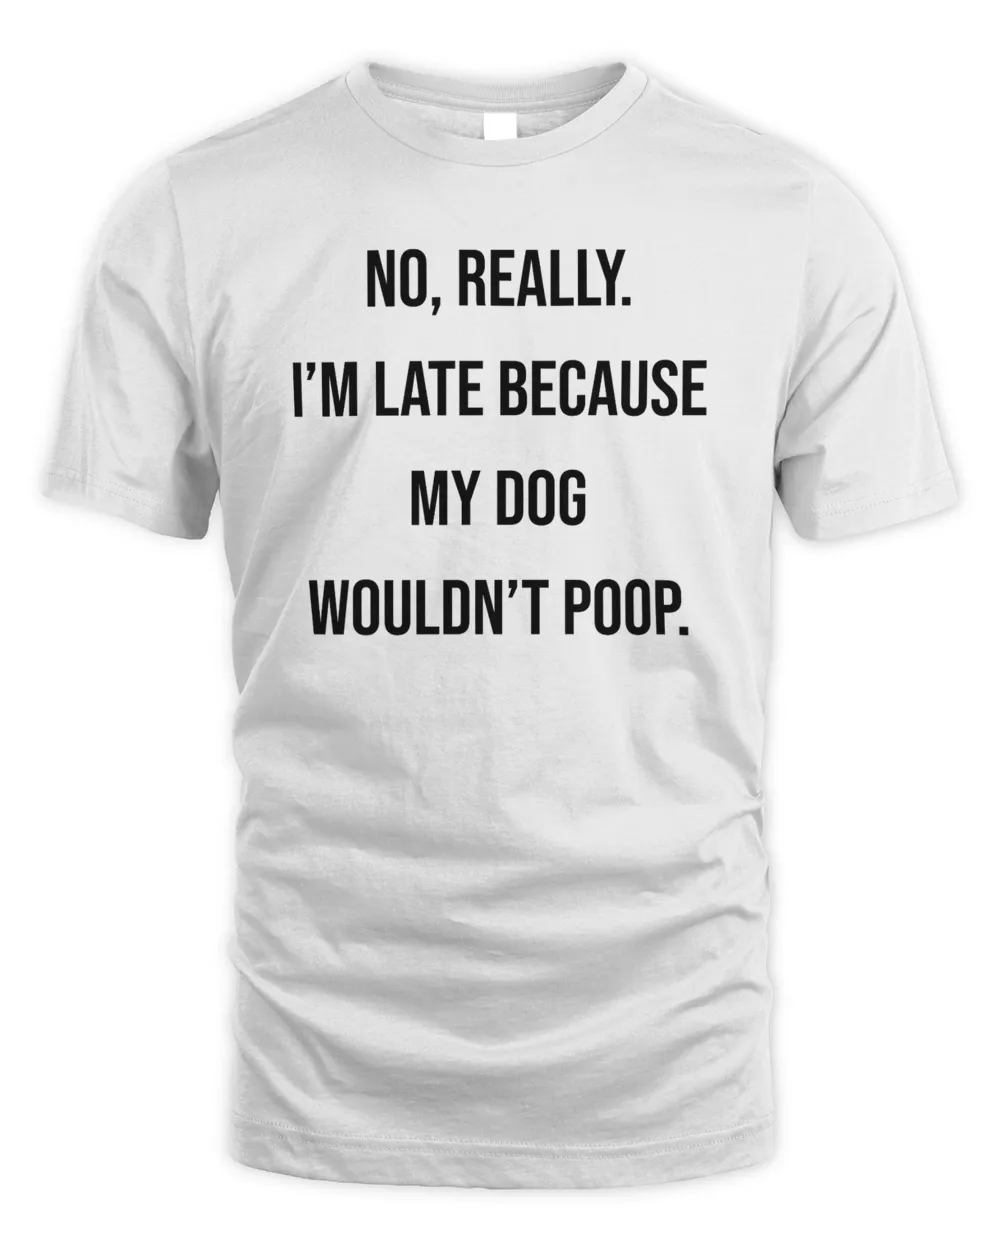 My Dog Wouldn't Poop